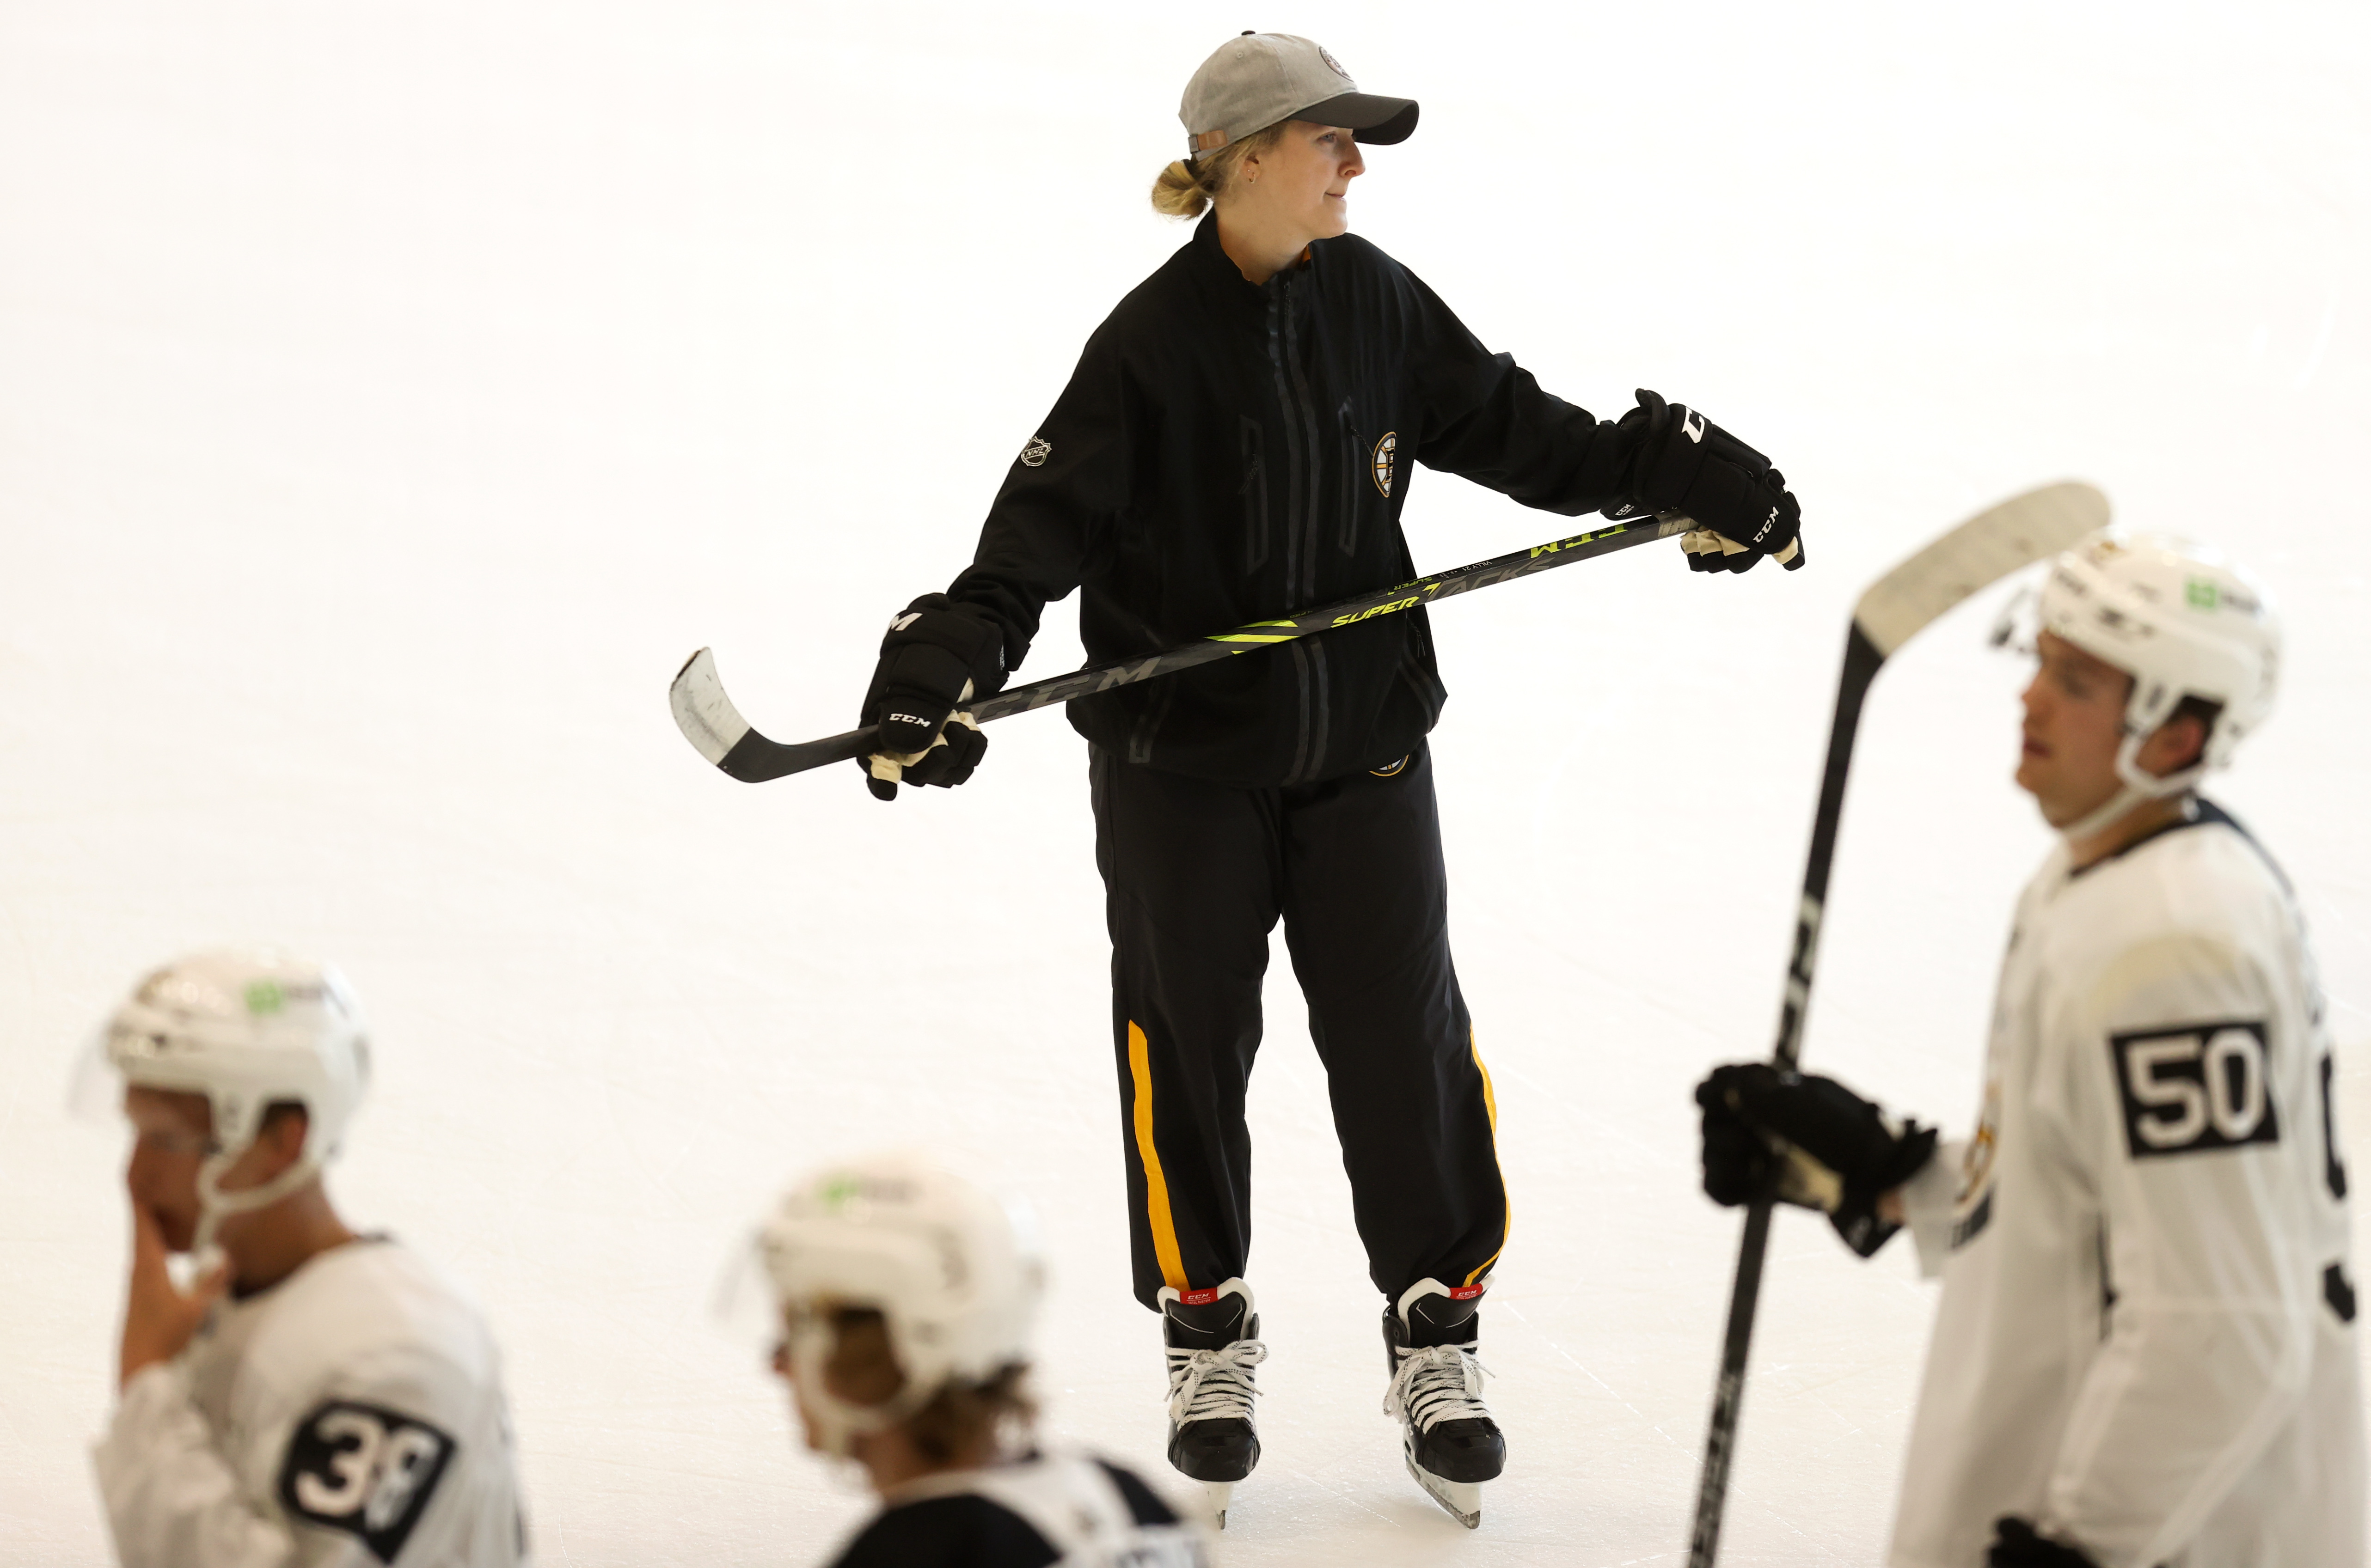 Getting Hockey Referees Ready for the Big Leagues - The New York Times